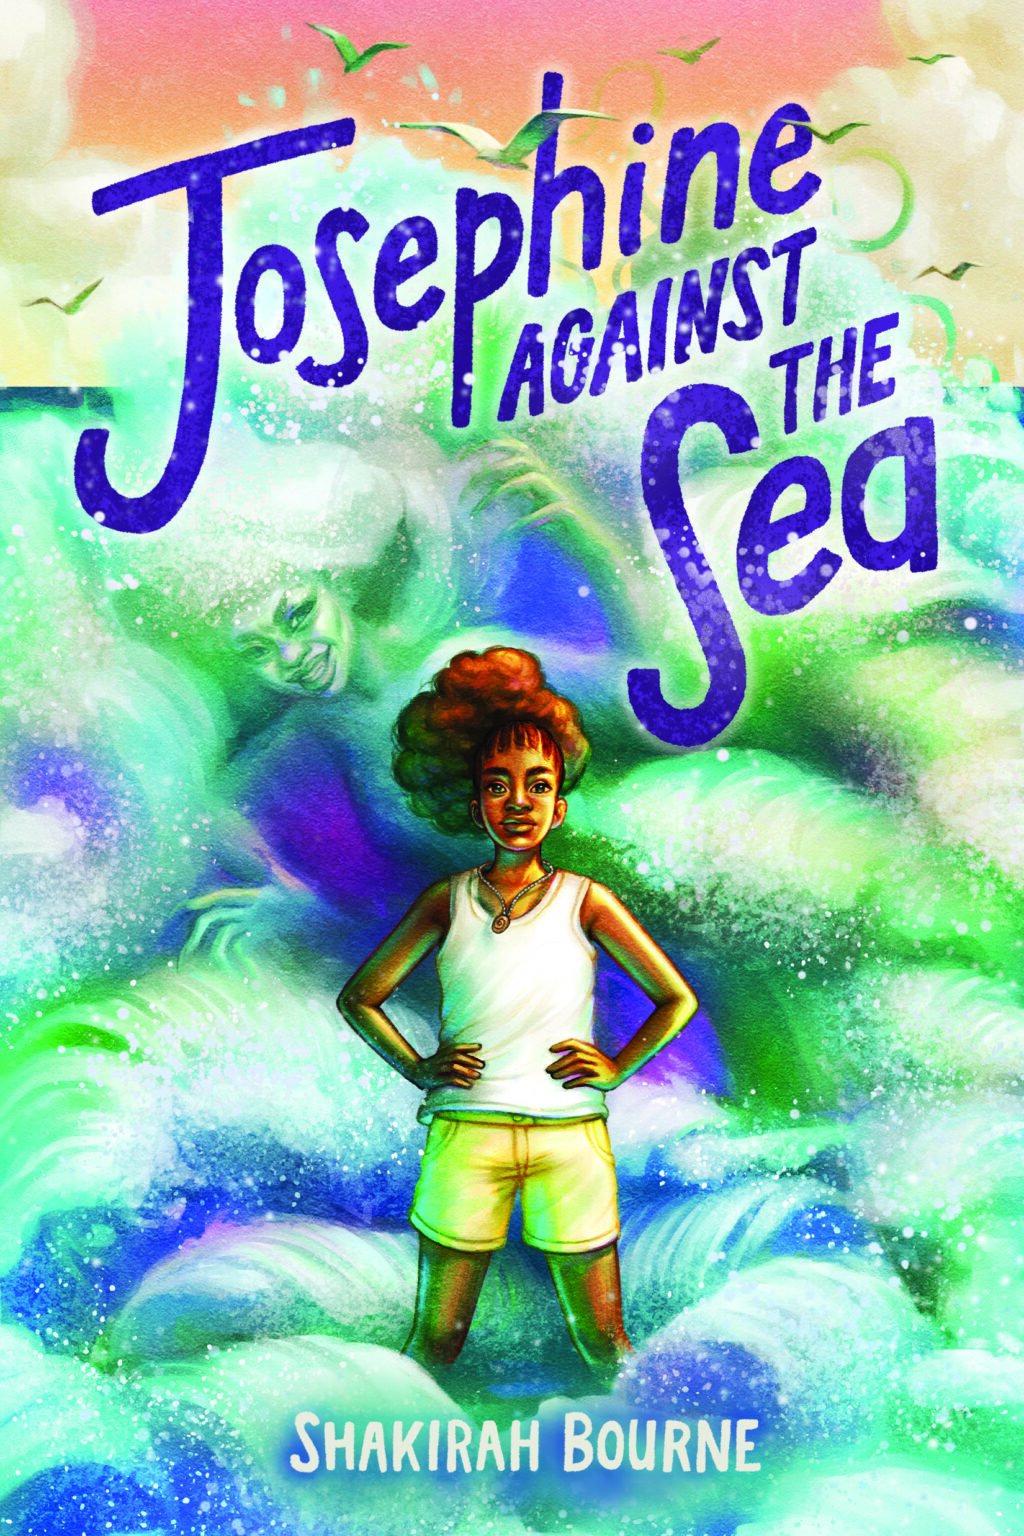 Josephine Against the Sea by Shakirah Bourne